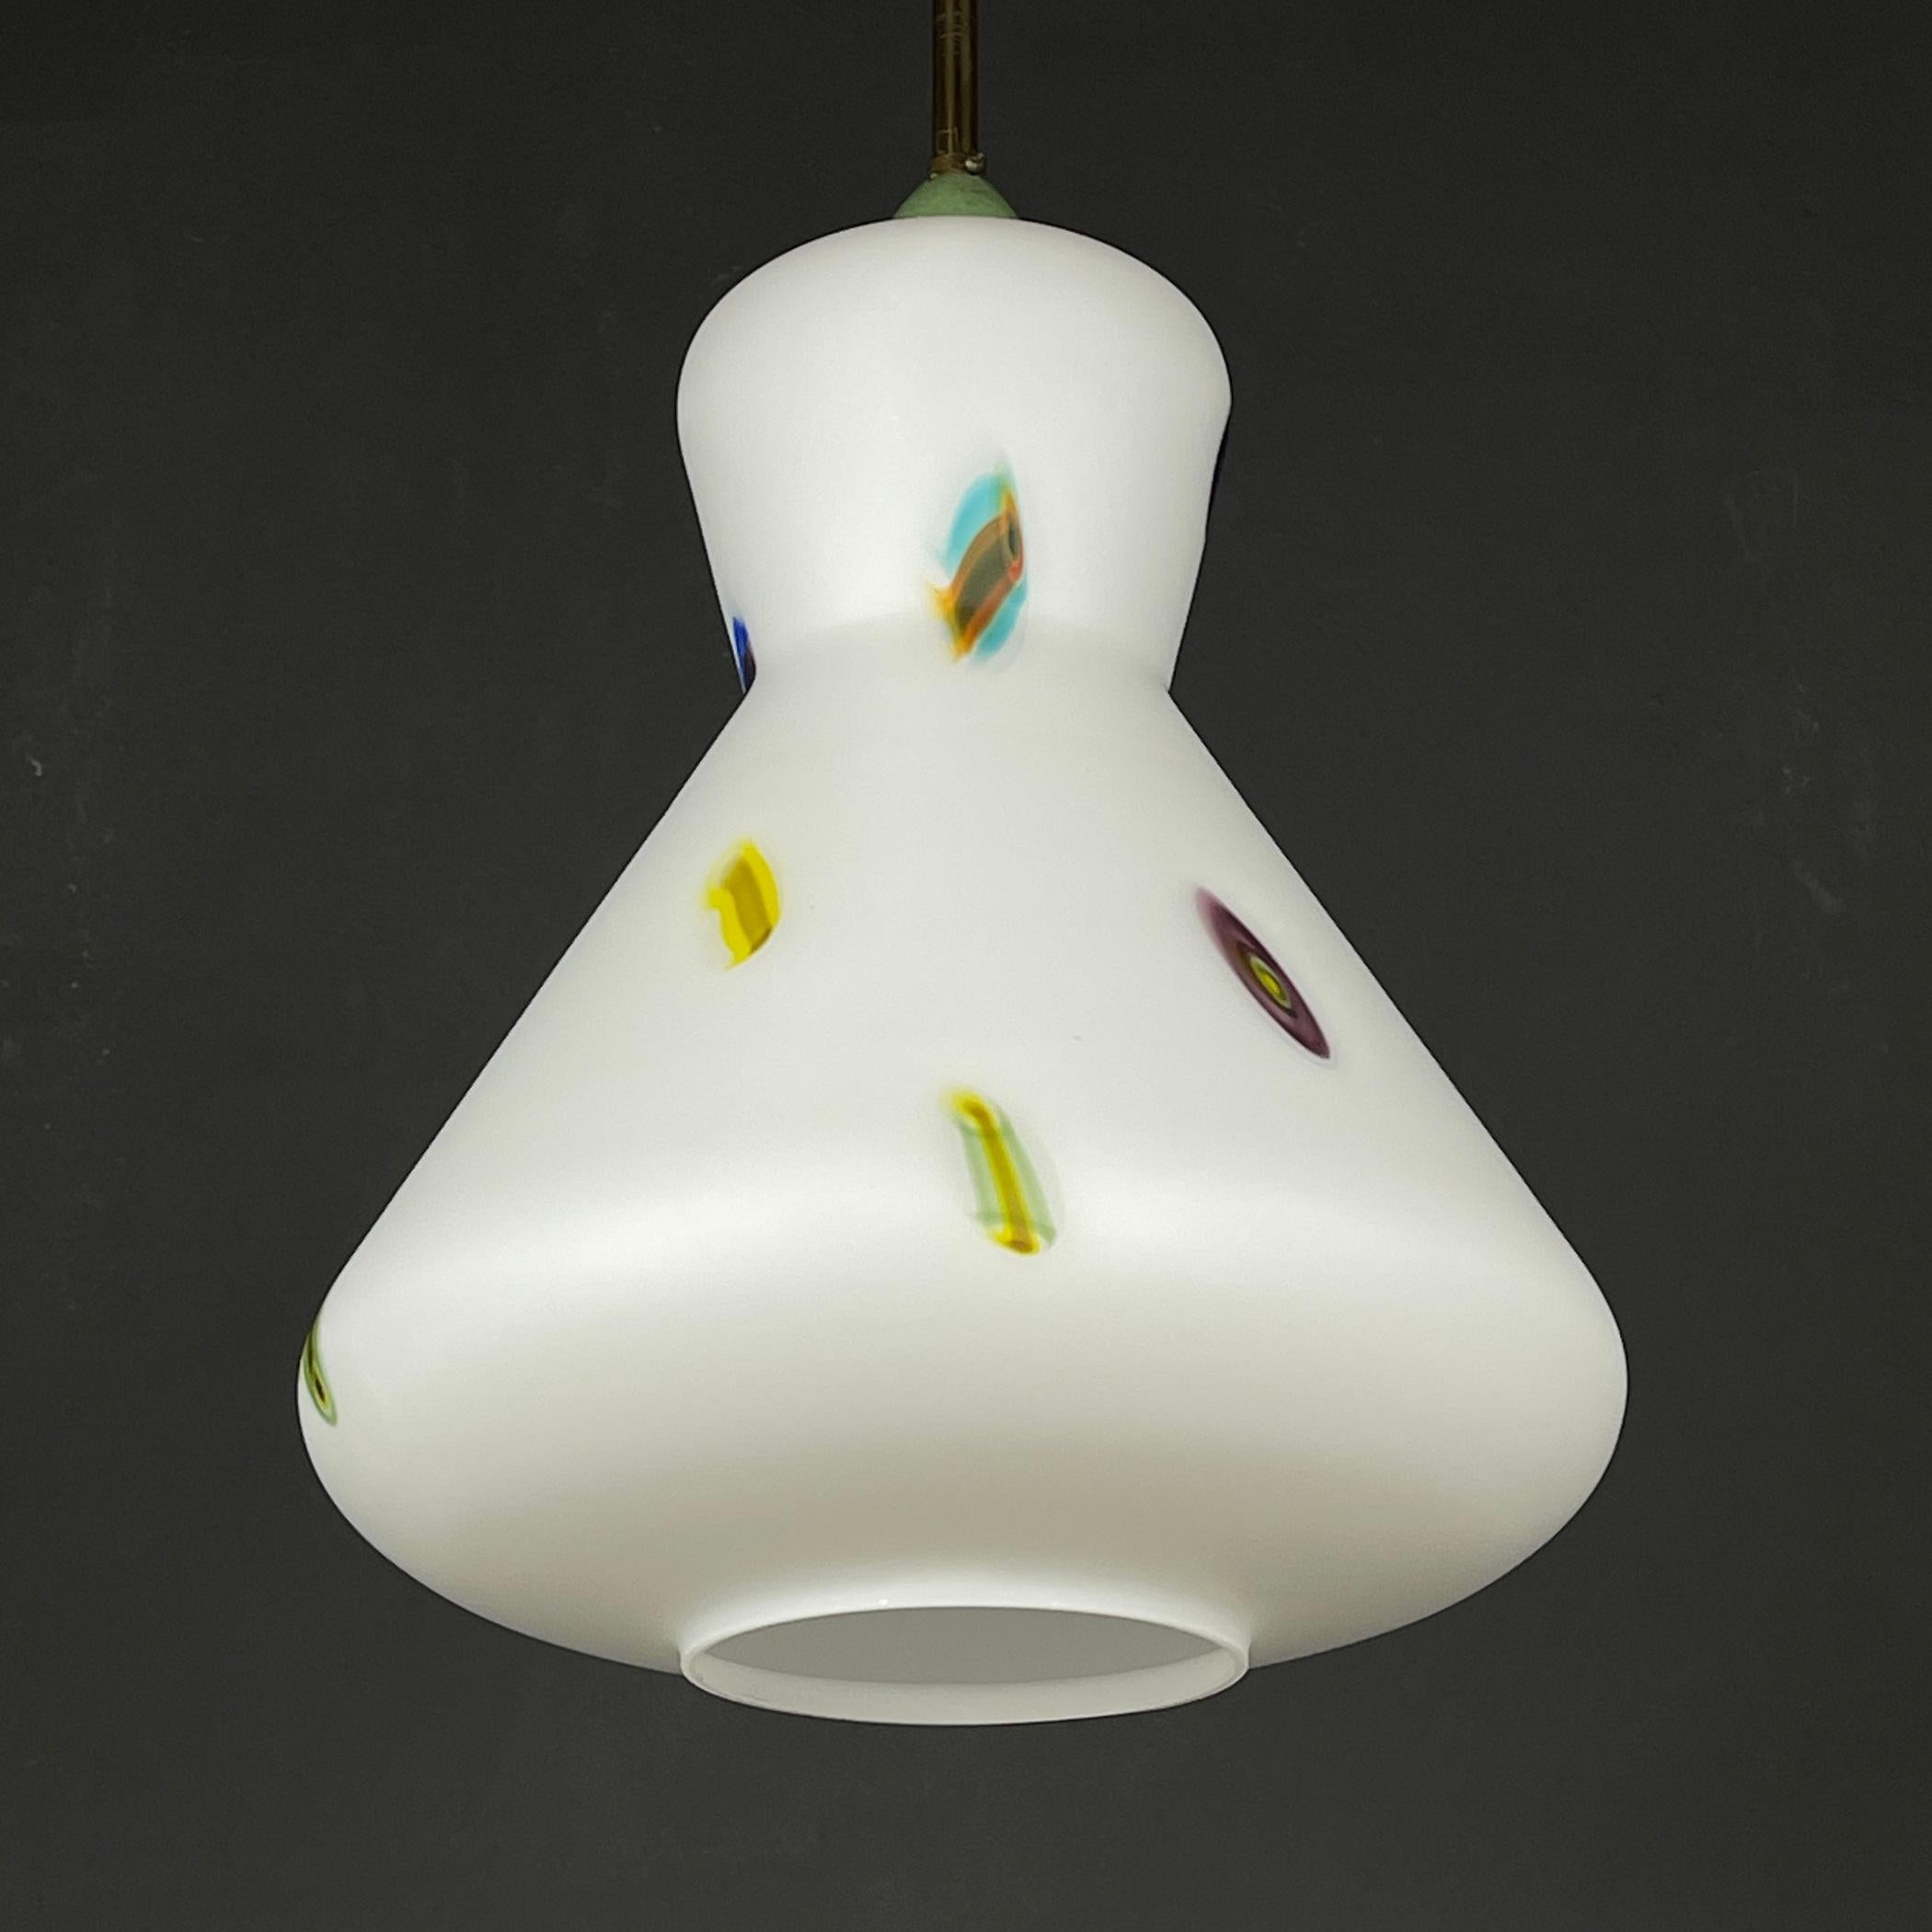 Midcentury Multicolor Opaline Murano Glass Pendant Lamp by Stilnovo Italy 1950s For Sale 2